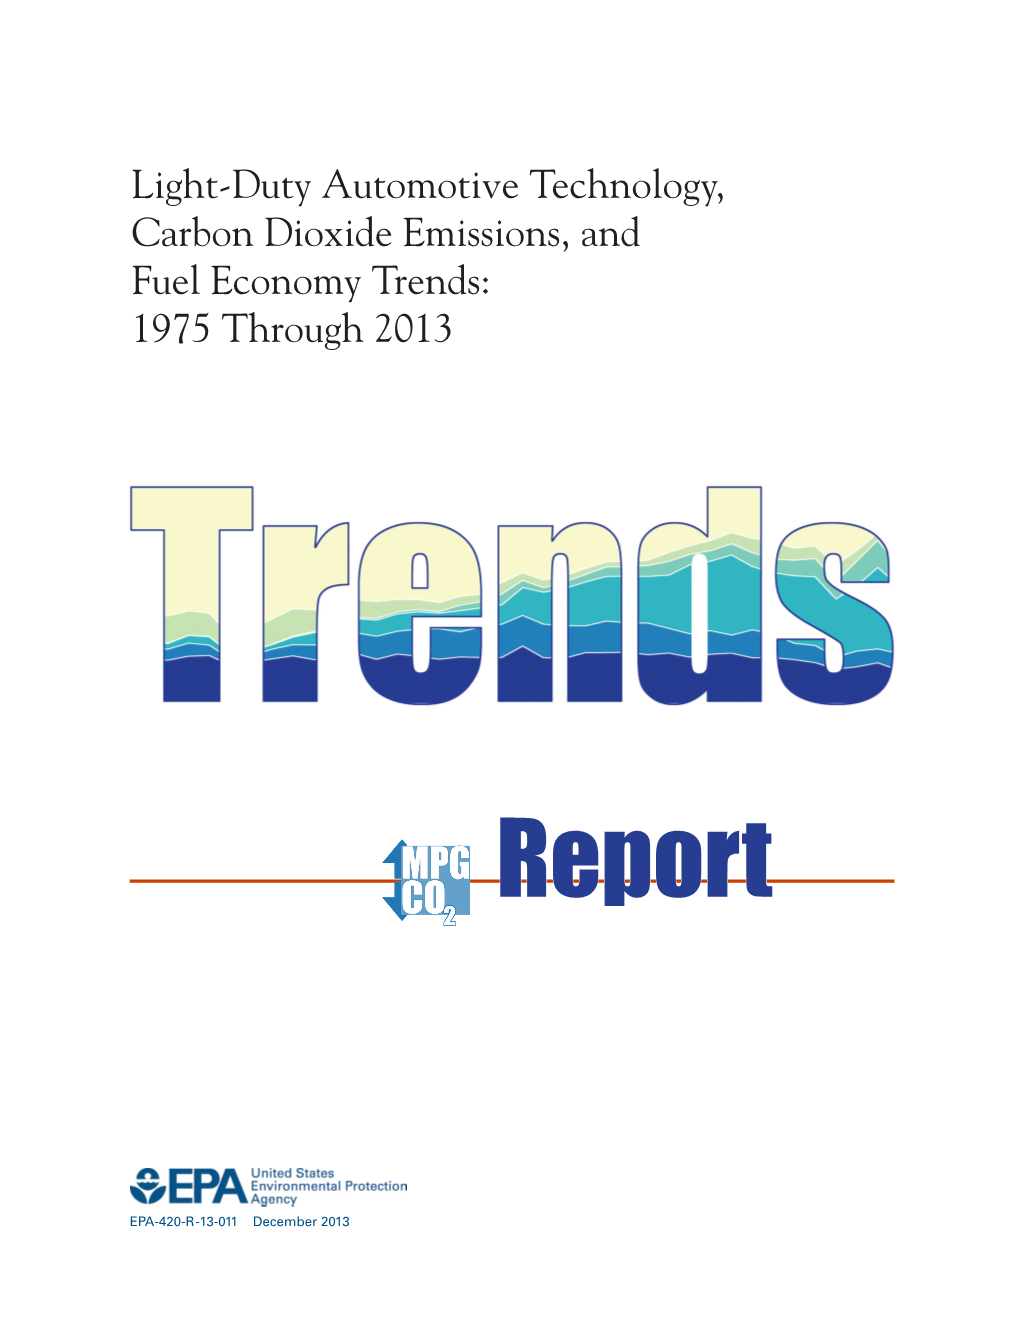 Light-Duty Automotive Technology, Carbon Dioxide Emissions, and Fuel Economy Trends: 1975 Through 2013